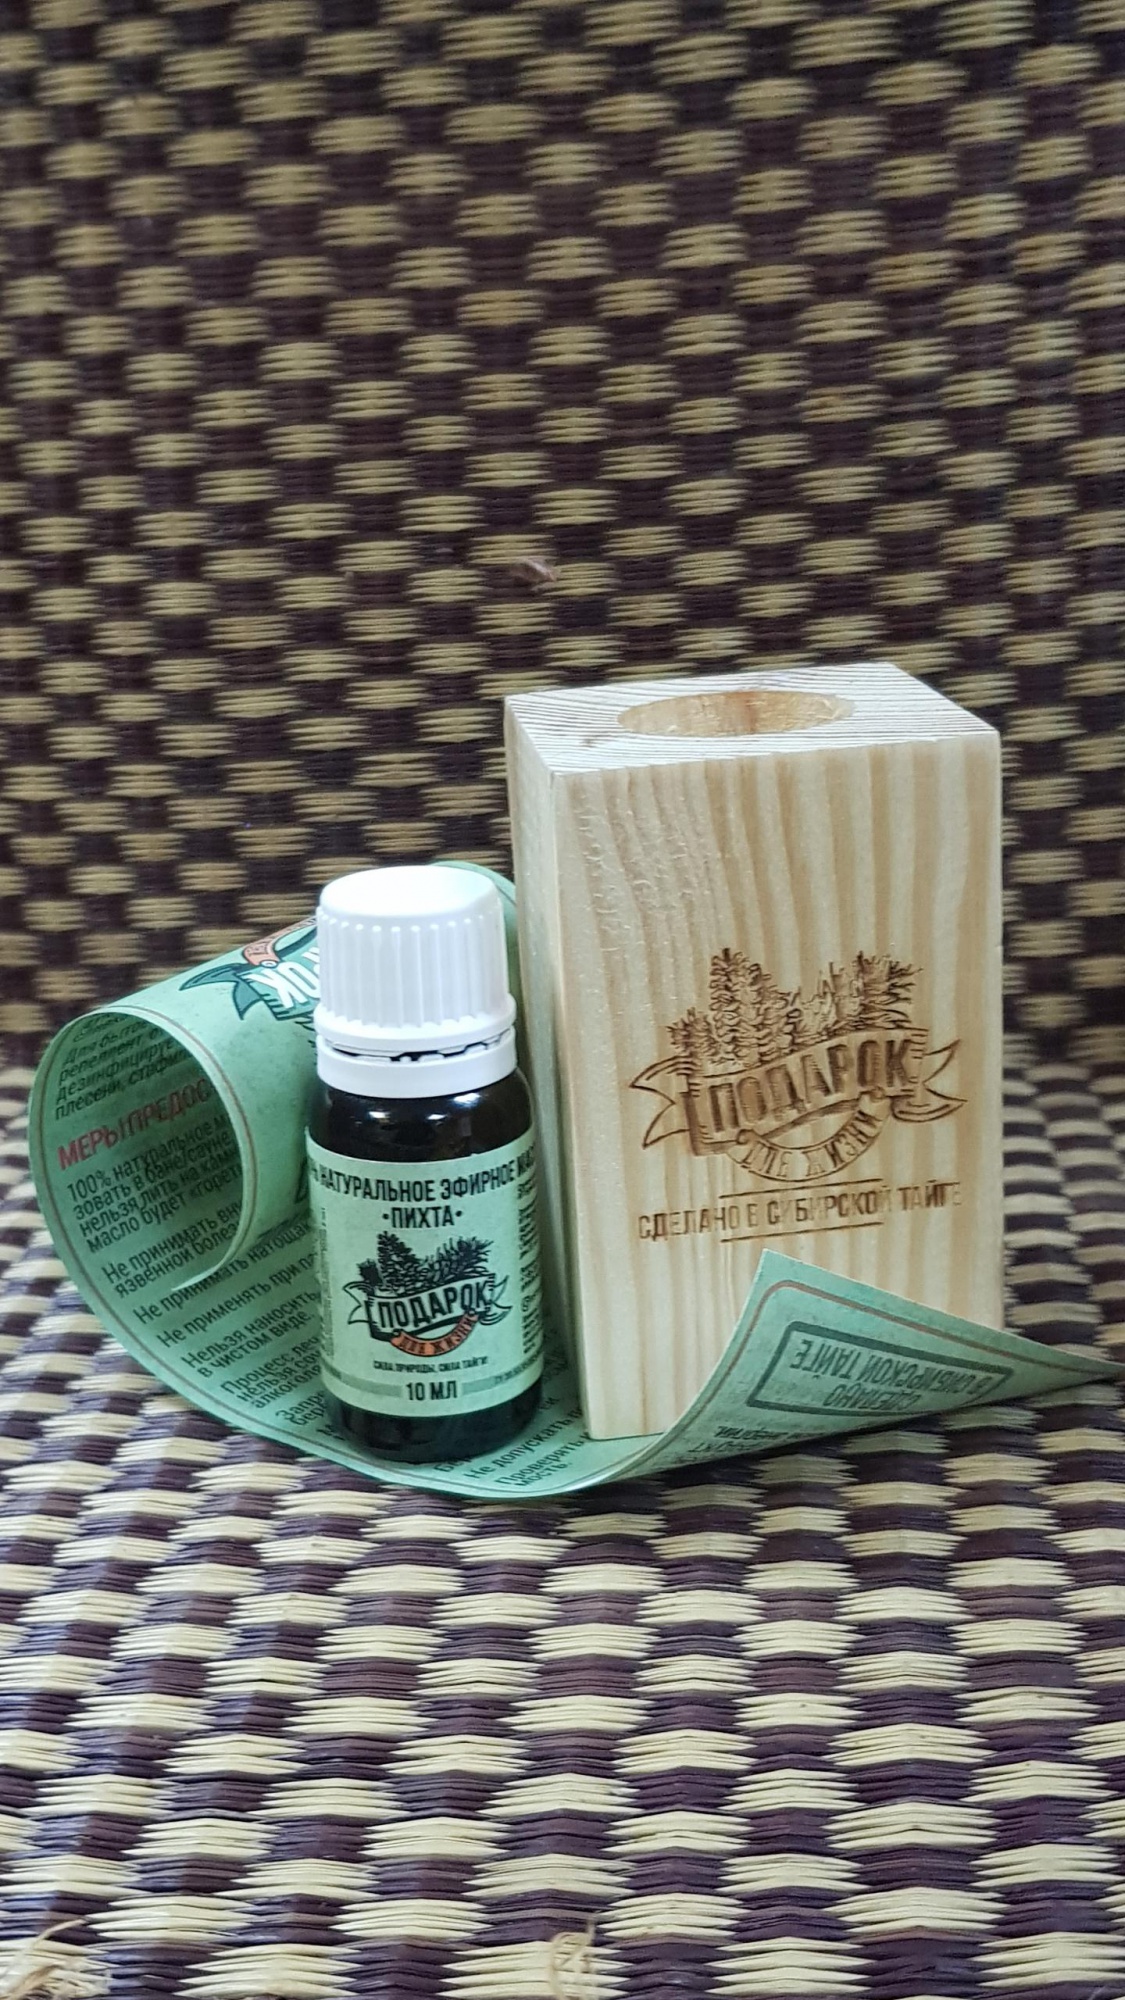 Gift-wrapped wooden case - 100% pure, natural fir oil, 10 ml